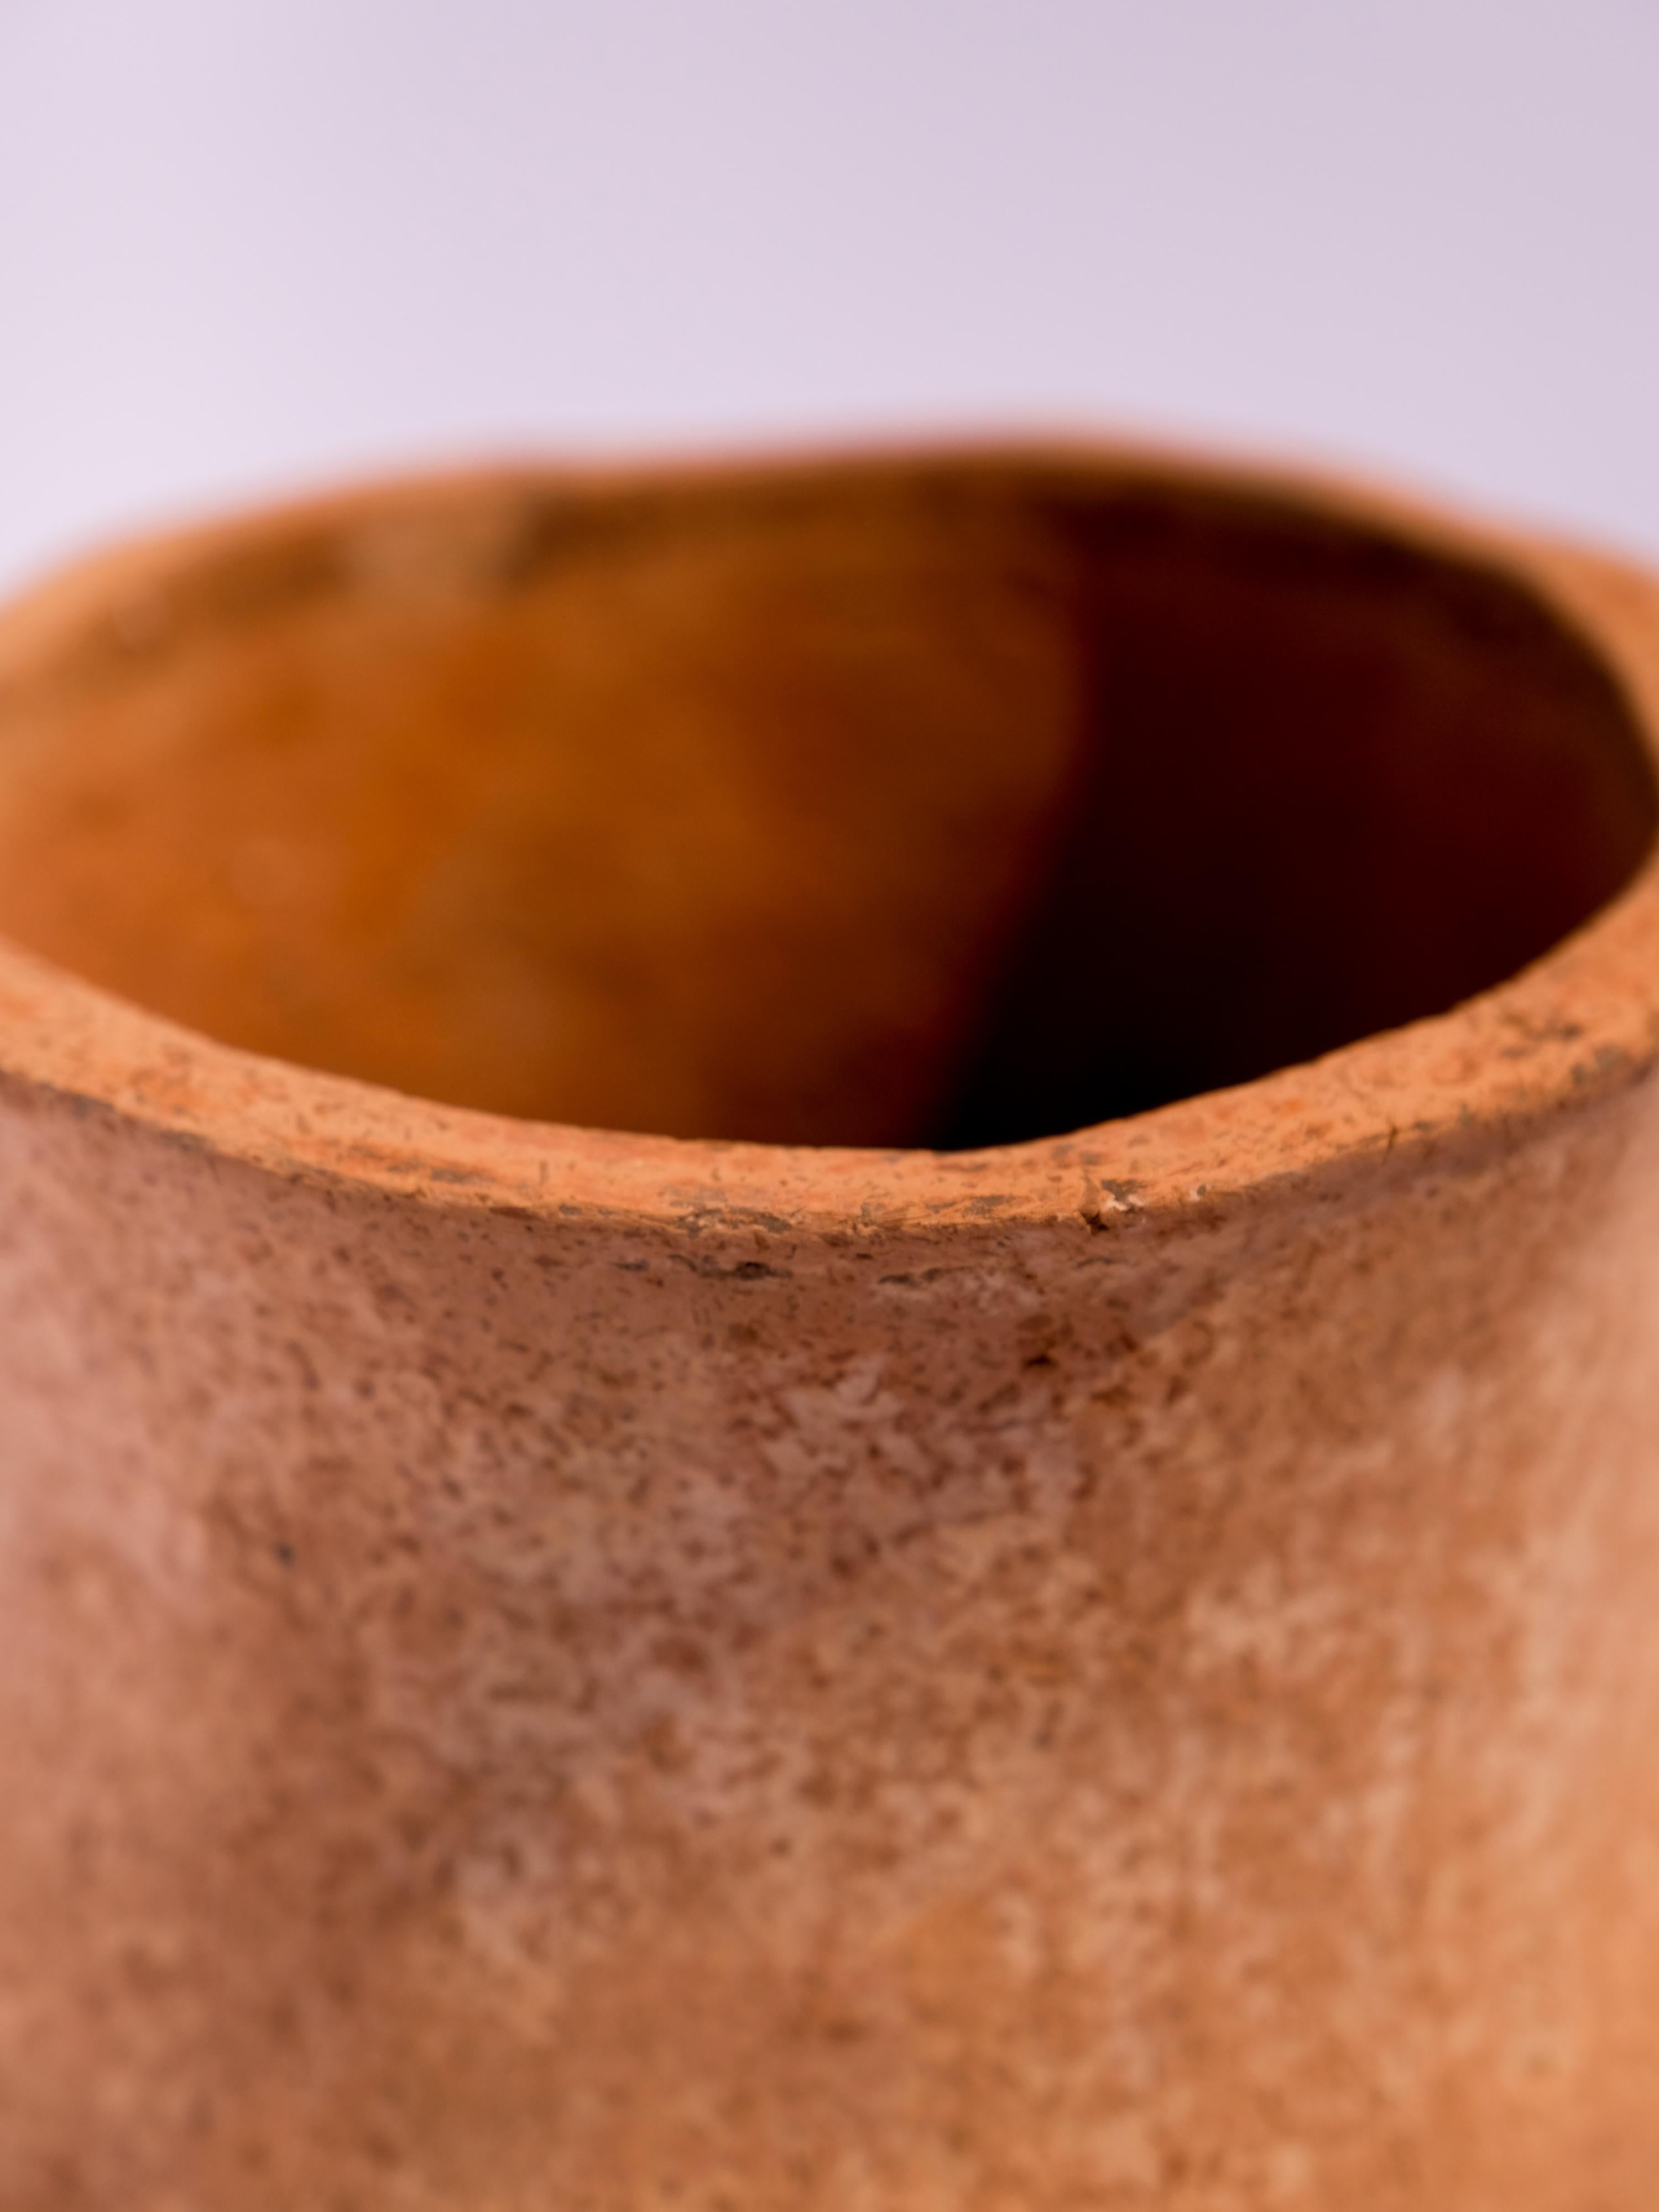 Arts and Crafts Traditional terracotta Jar Made of Clay Handcrafted by the Moroccan Potter Aïcha For Sale